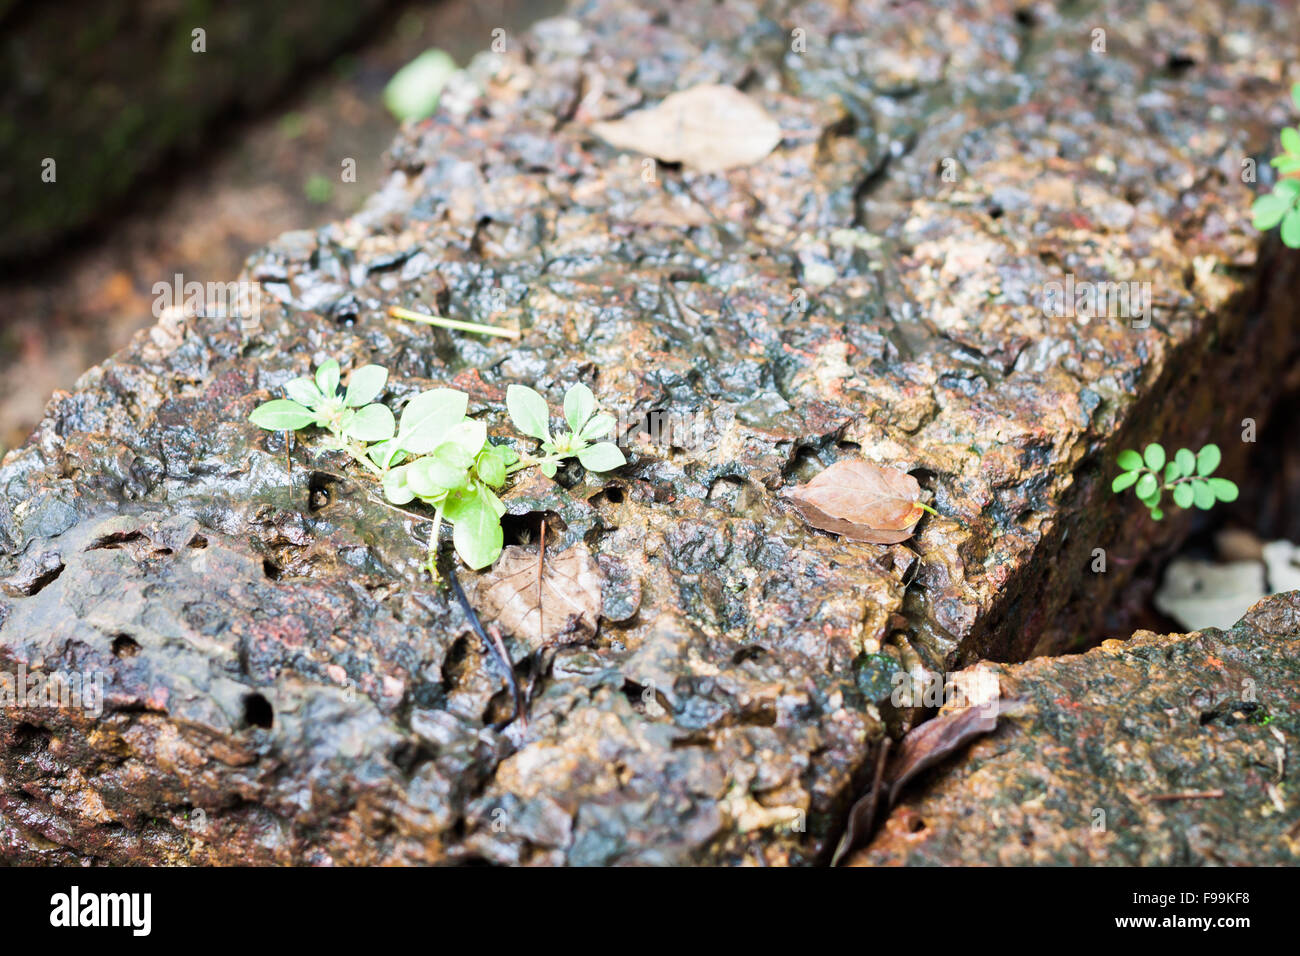 Close-up of laterite in garden, stock photo Stock Photo